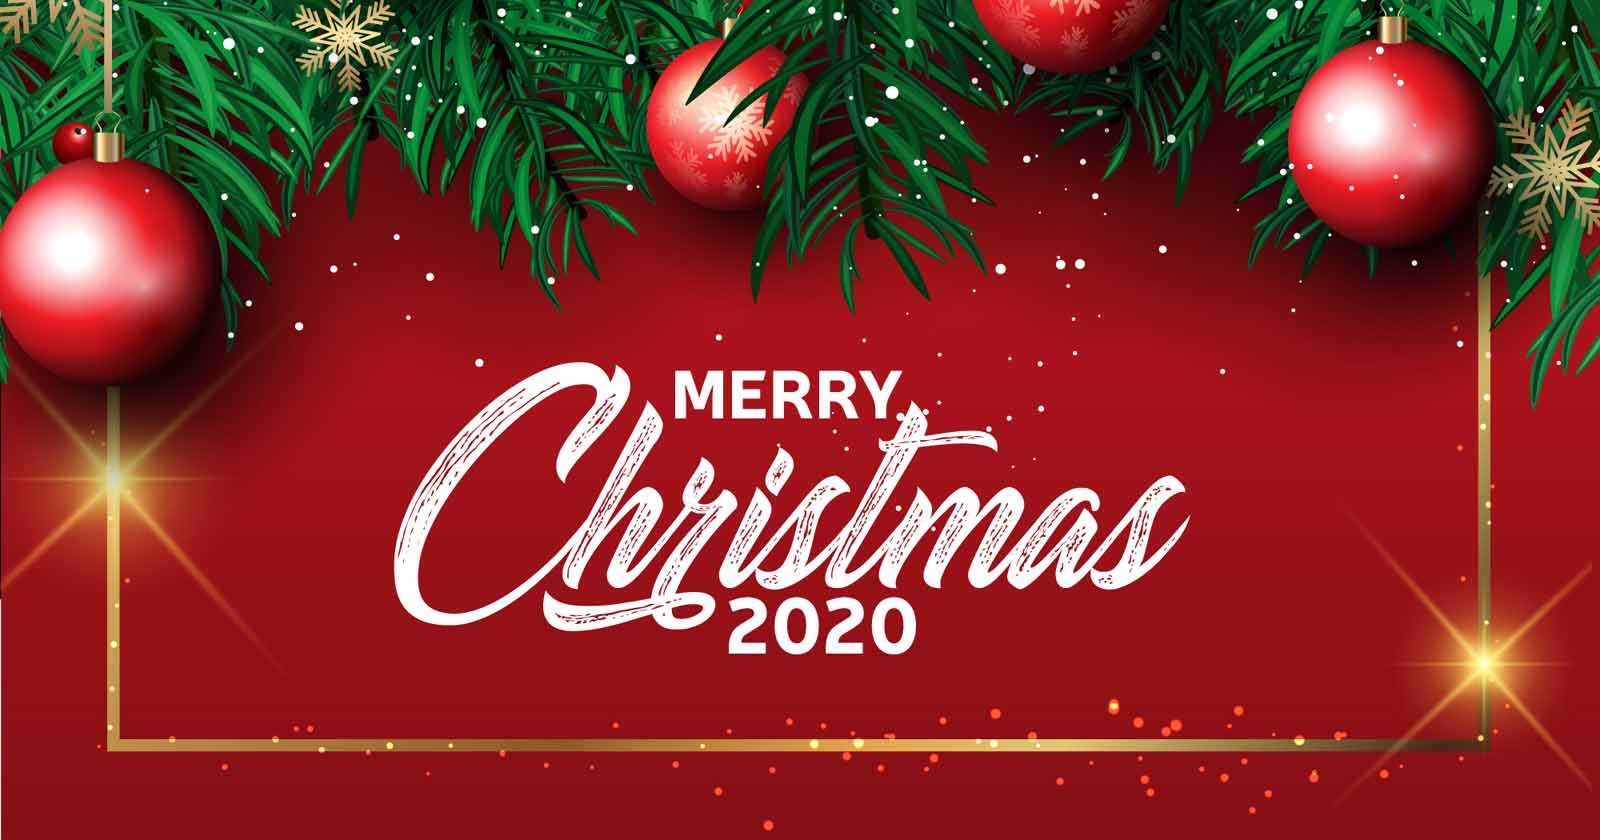 happy merry christmas 2020 images